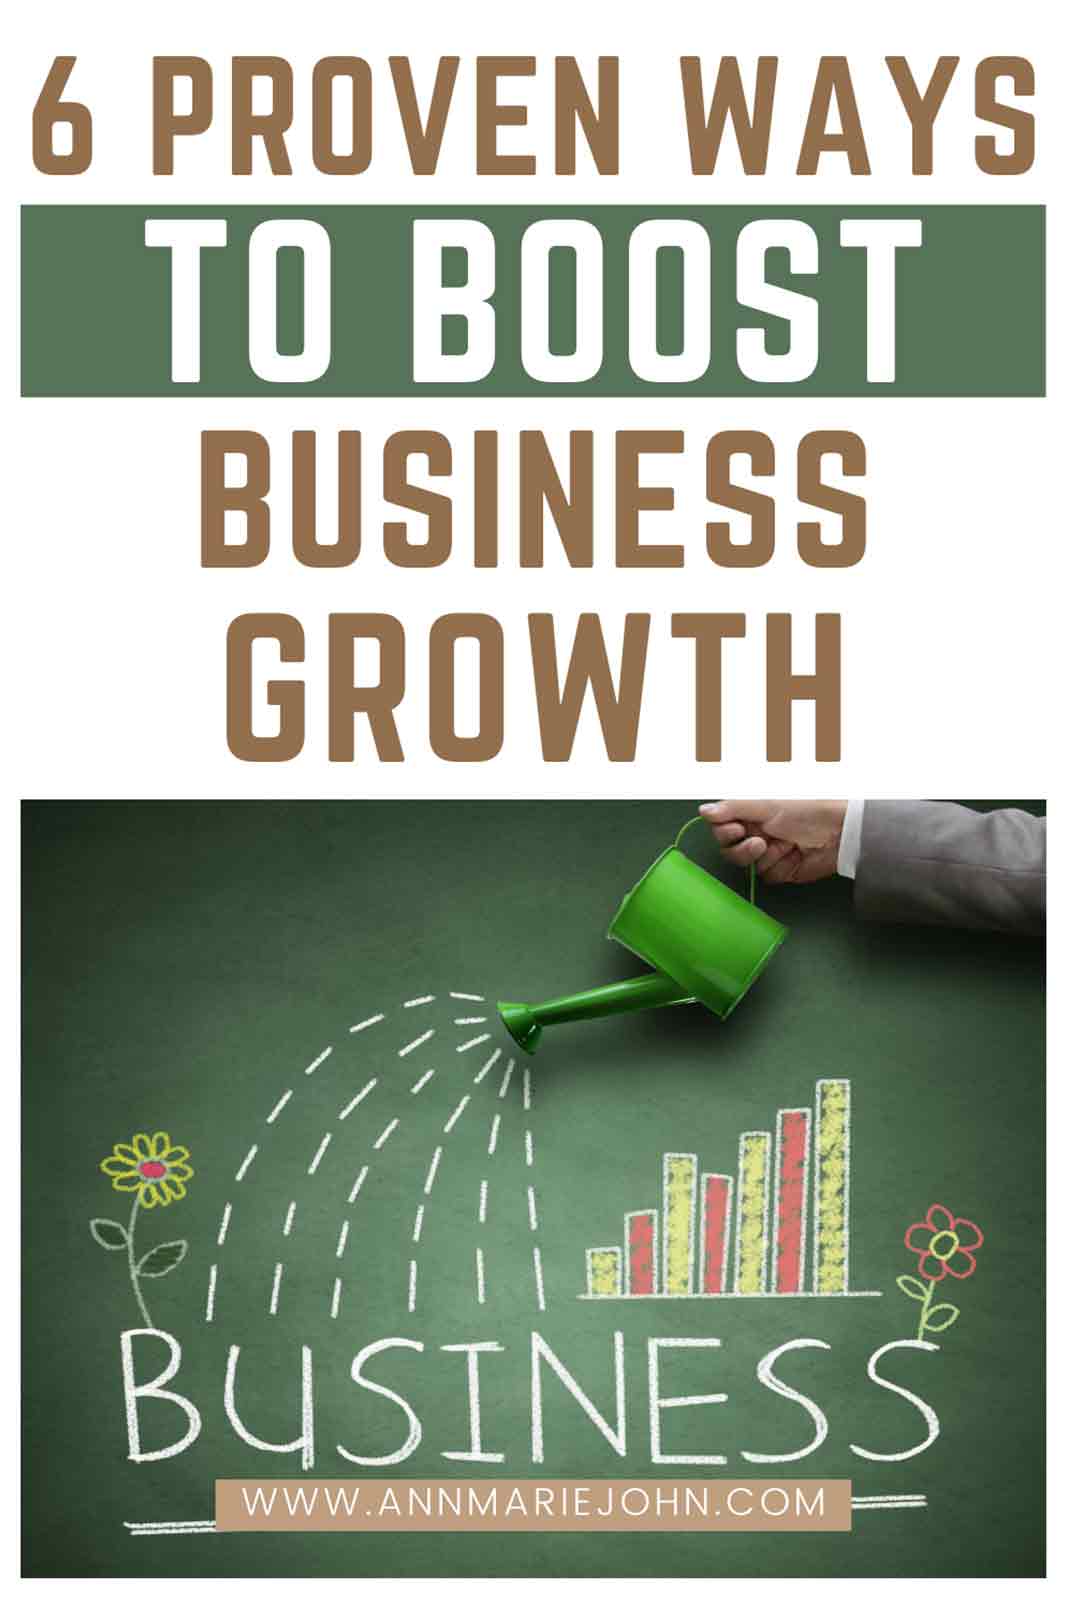 Ways To Boost Business Growth